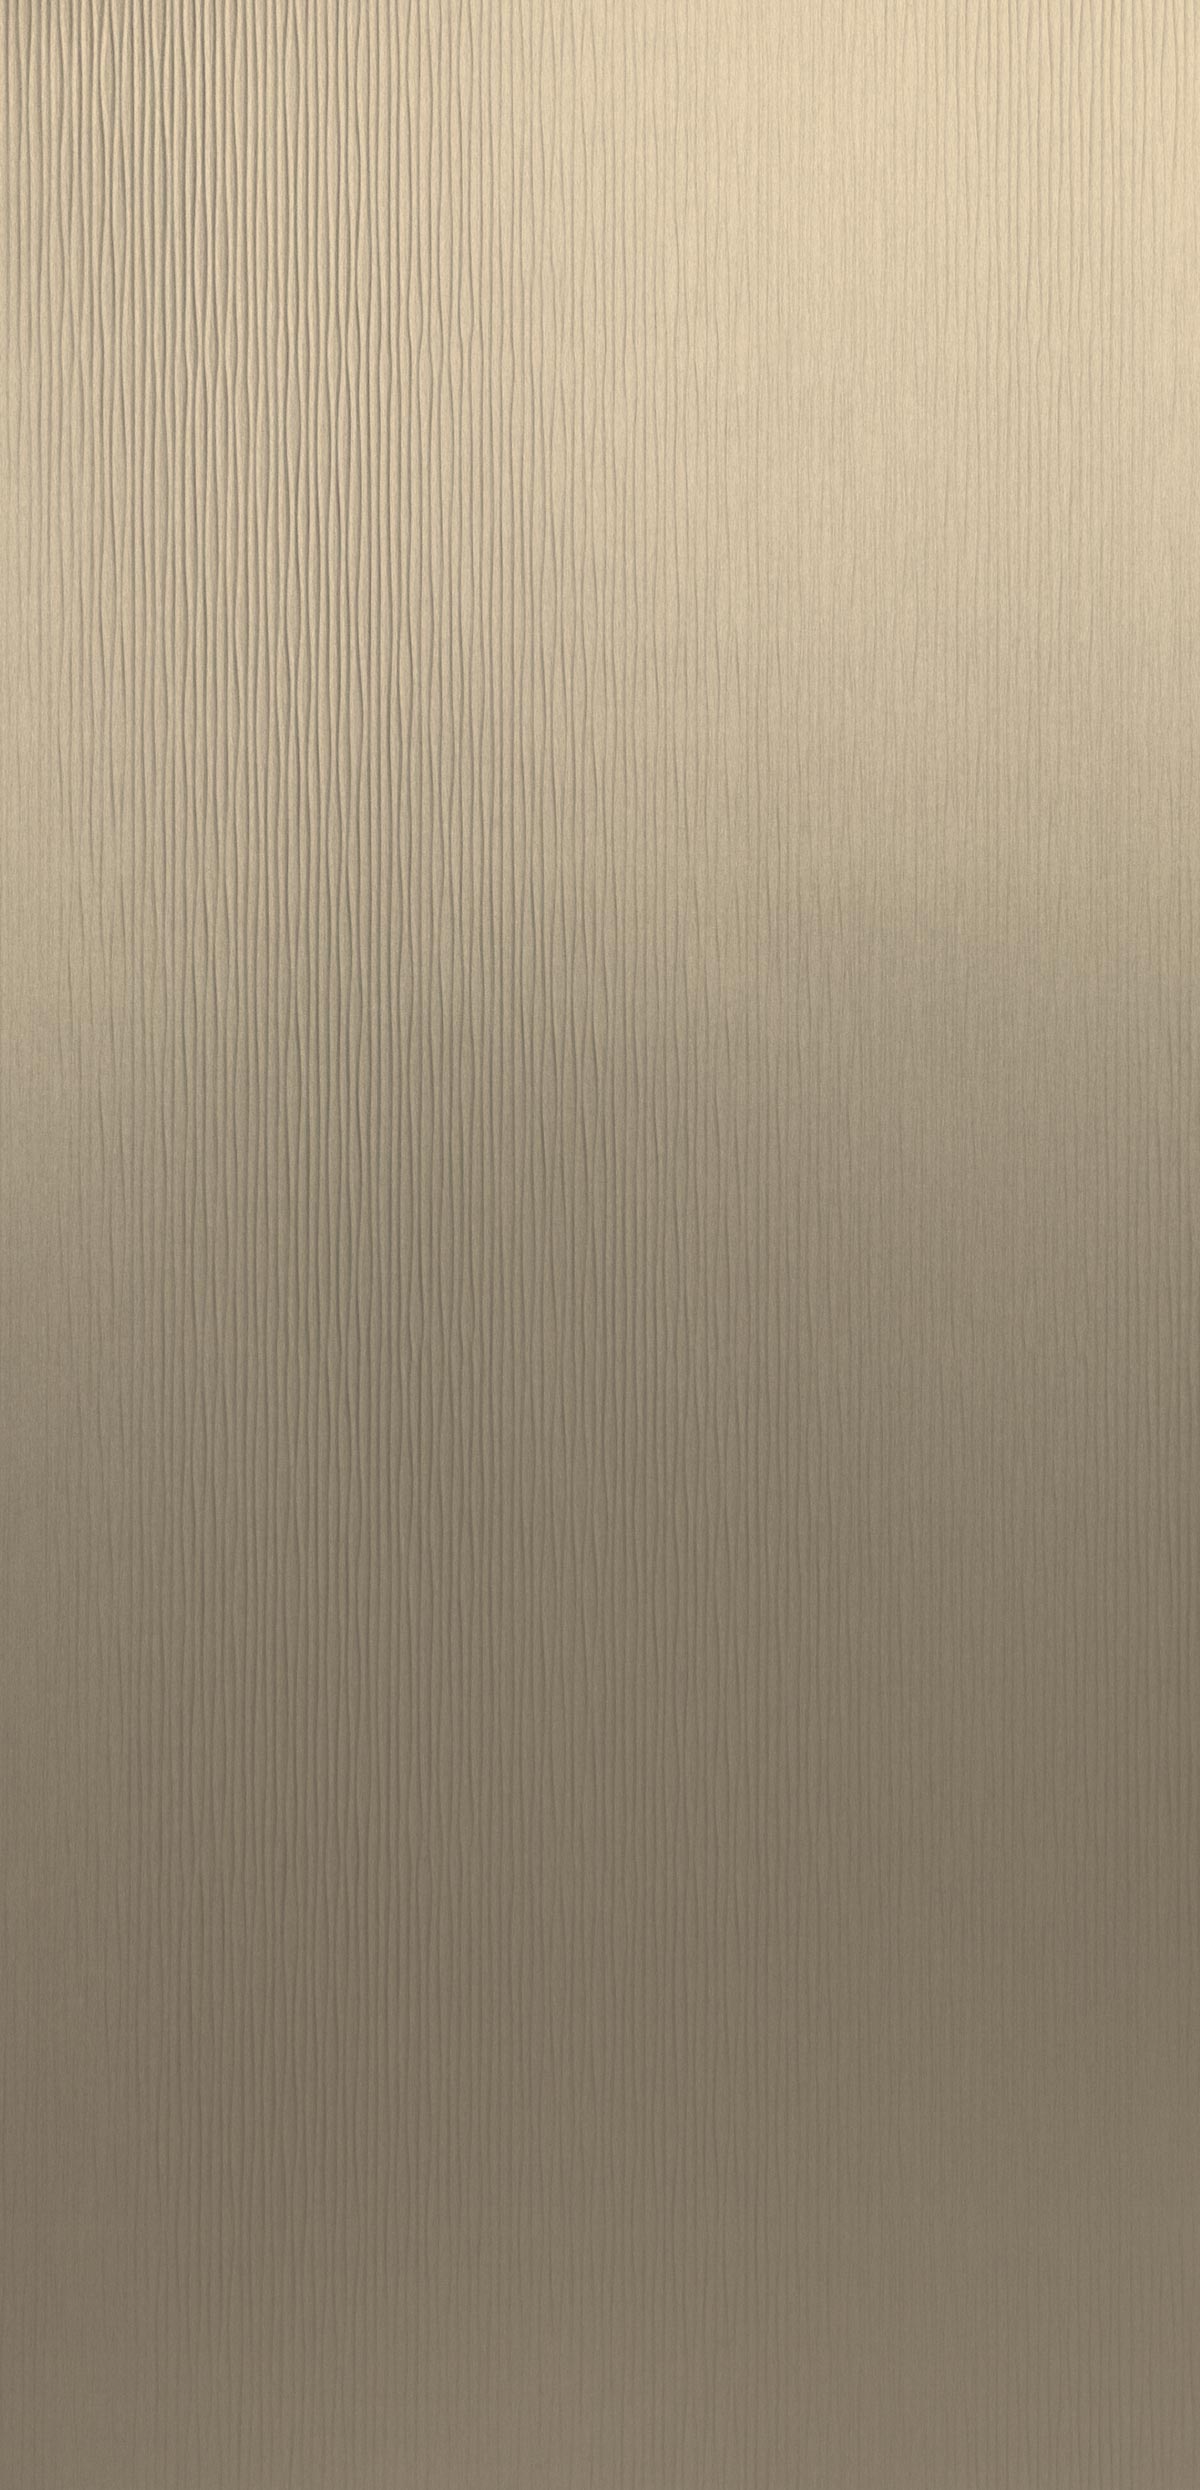 Cannelé Bronze brushed 4045-panel